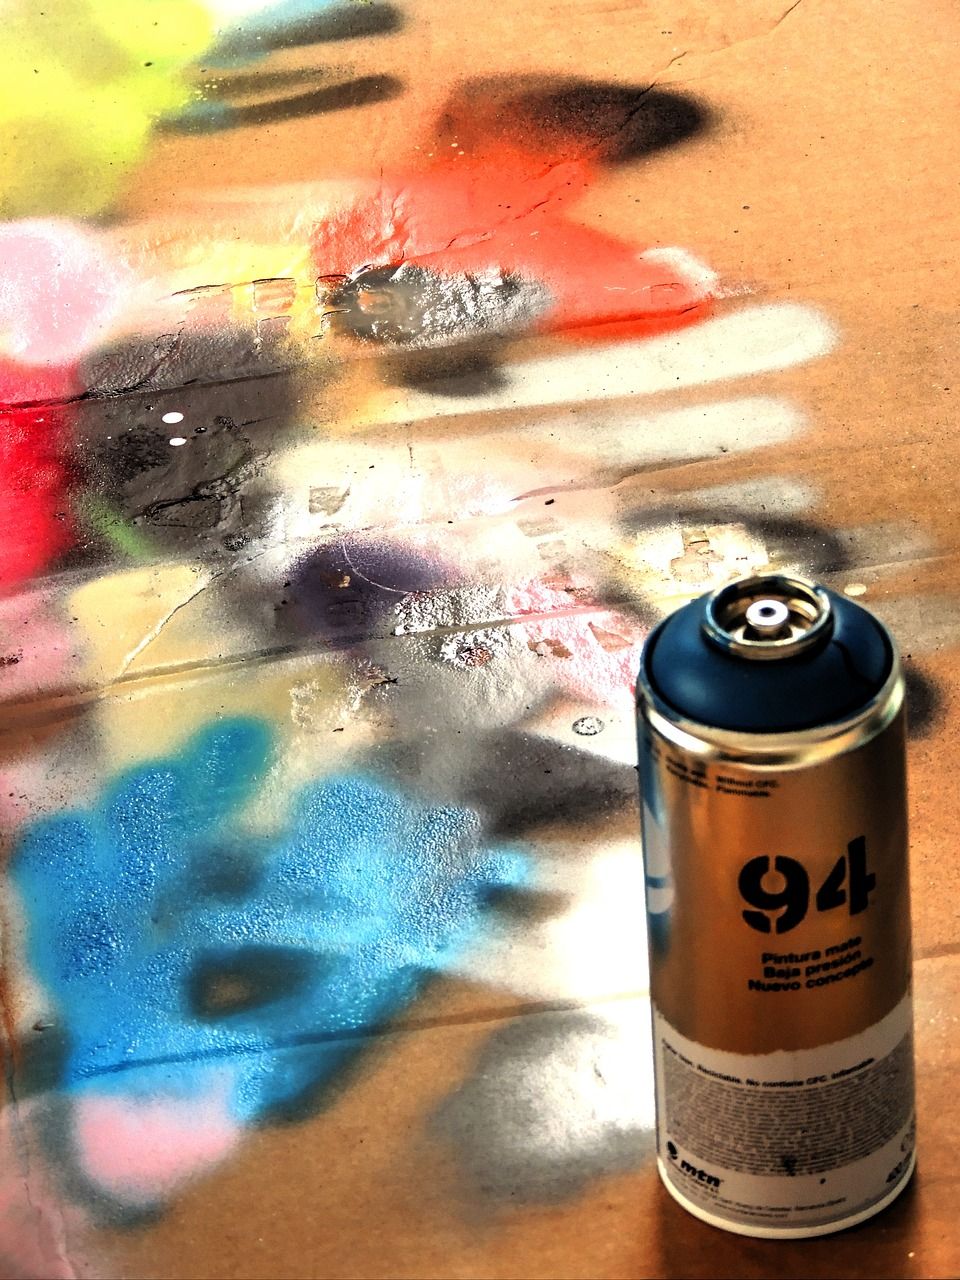 A can of spray paint next to a wall with graffiti on it - Graffiti